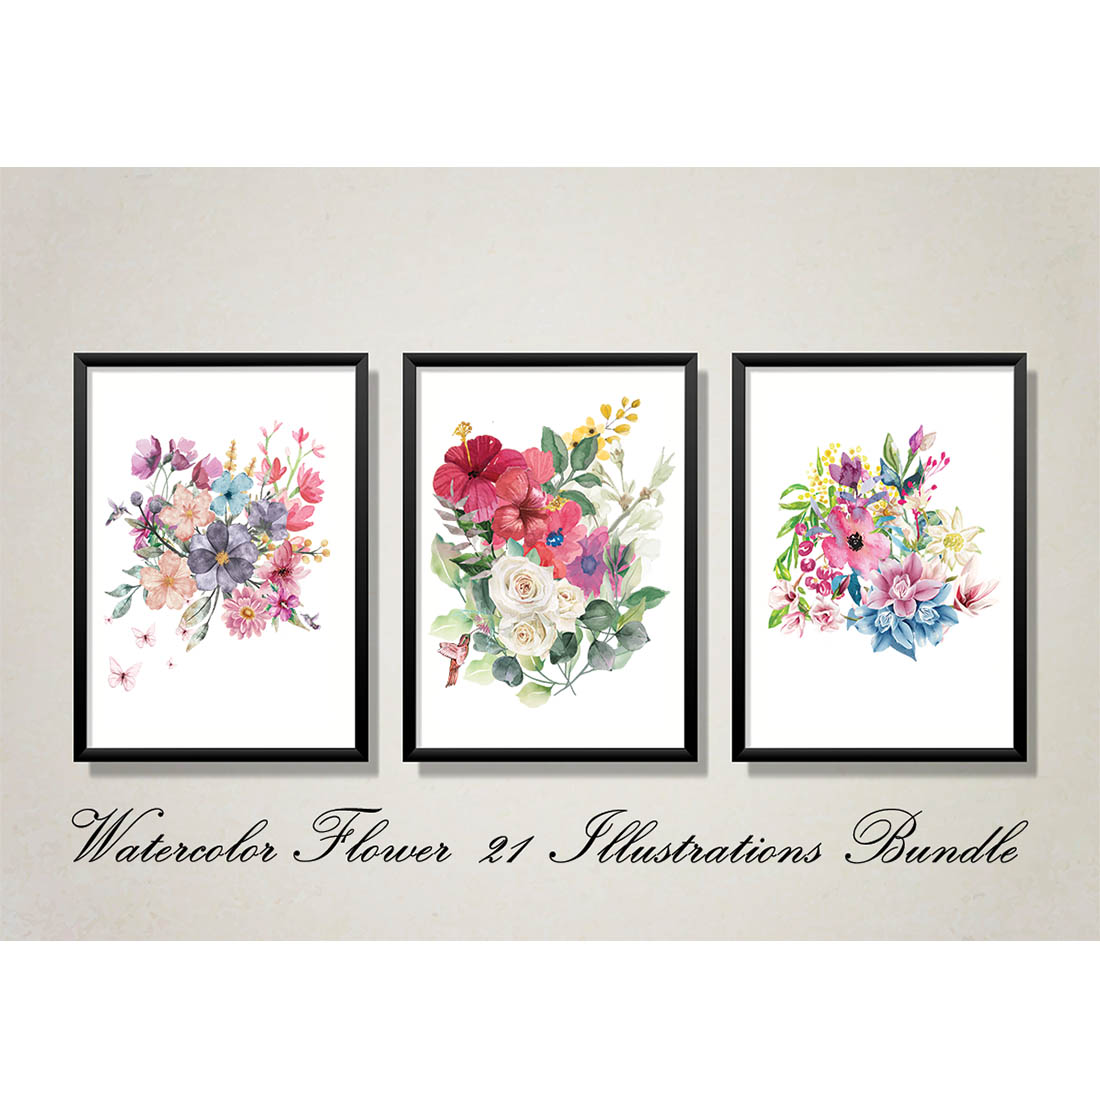 Watercolor Flower Illustrations cover image.